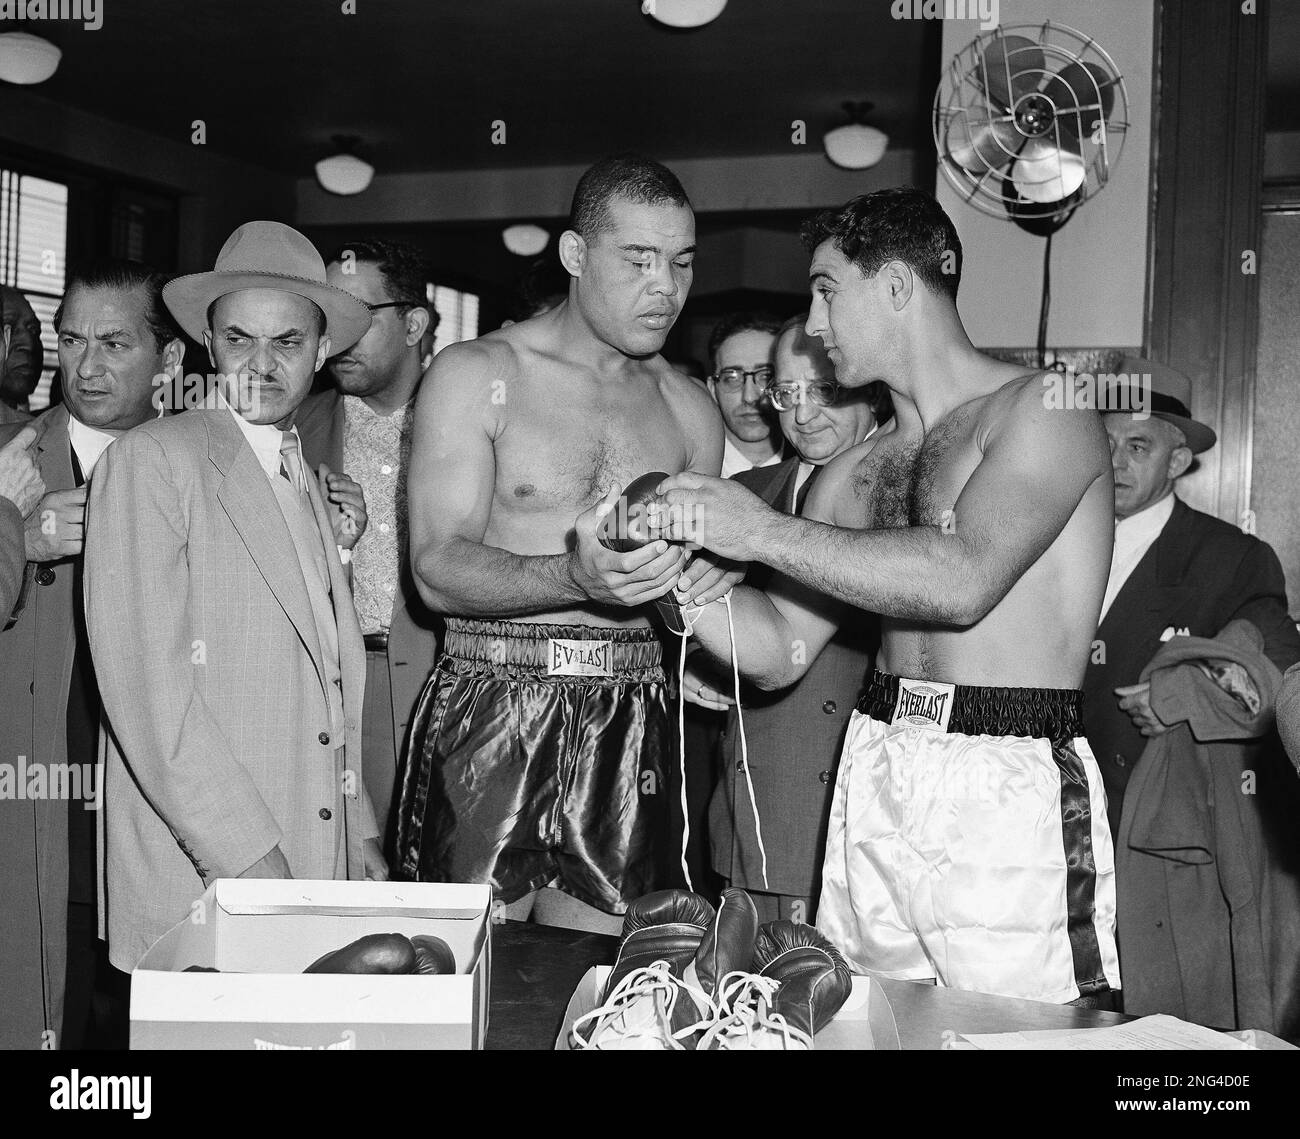 Joe Louis (left) and his opponent, Oct. 26, 1951 in a ten-round heavyweight  bout, Rocky Marciano (right) of Brockton, Mass., check over the gloves they  will wear. Watching (center) is Deputy State